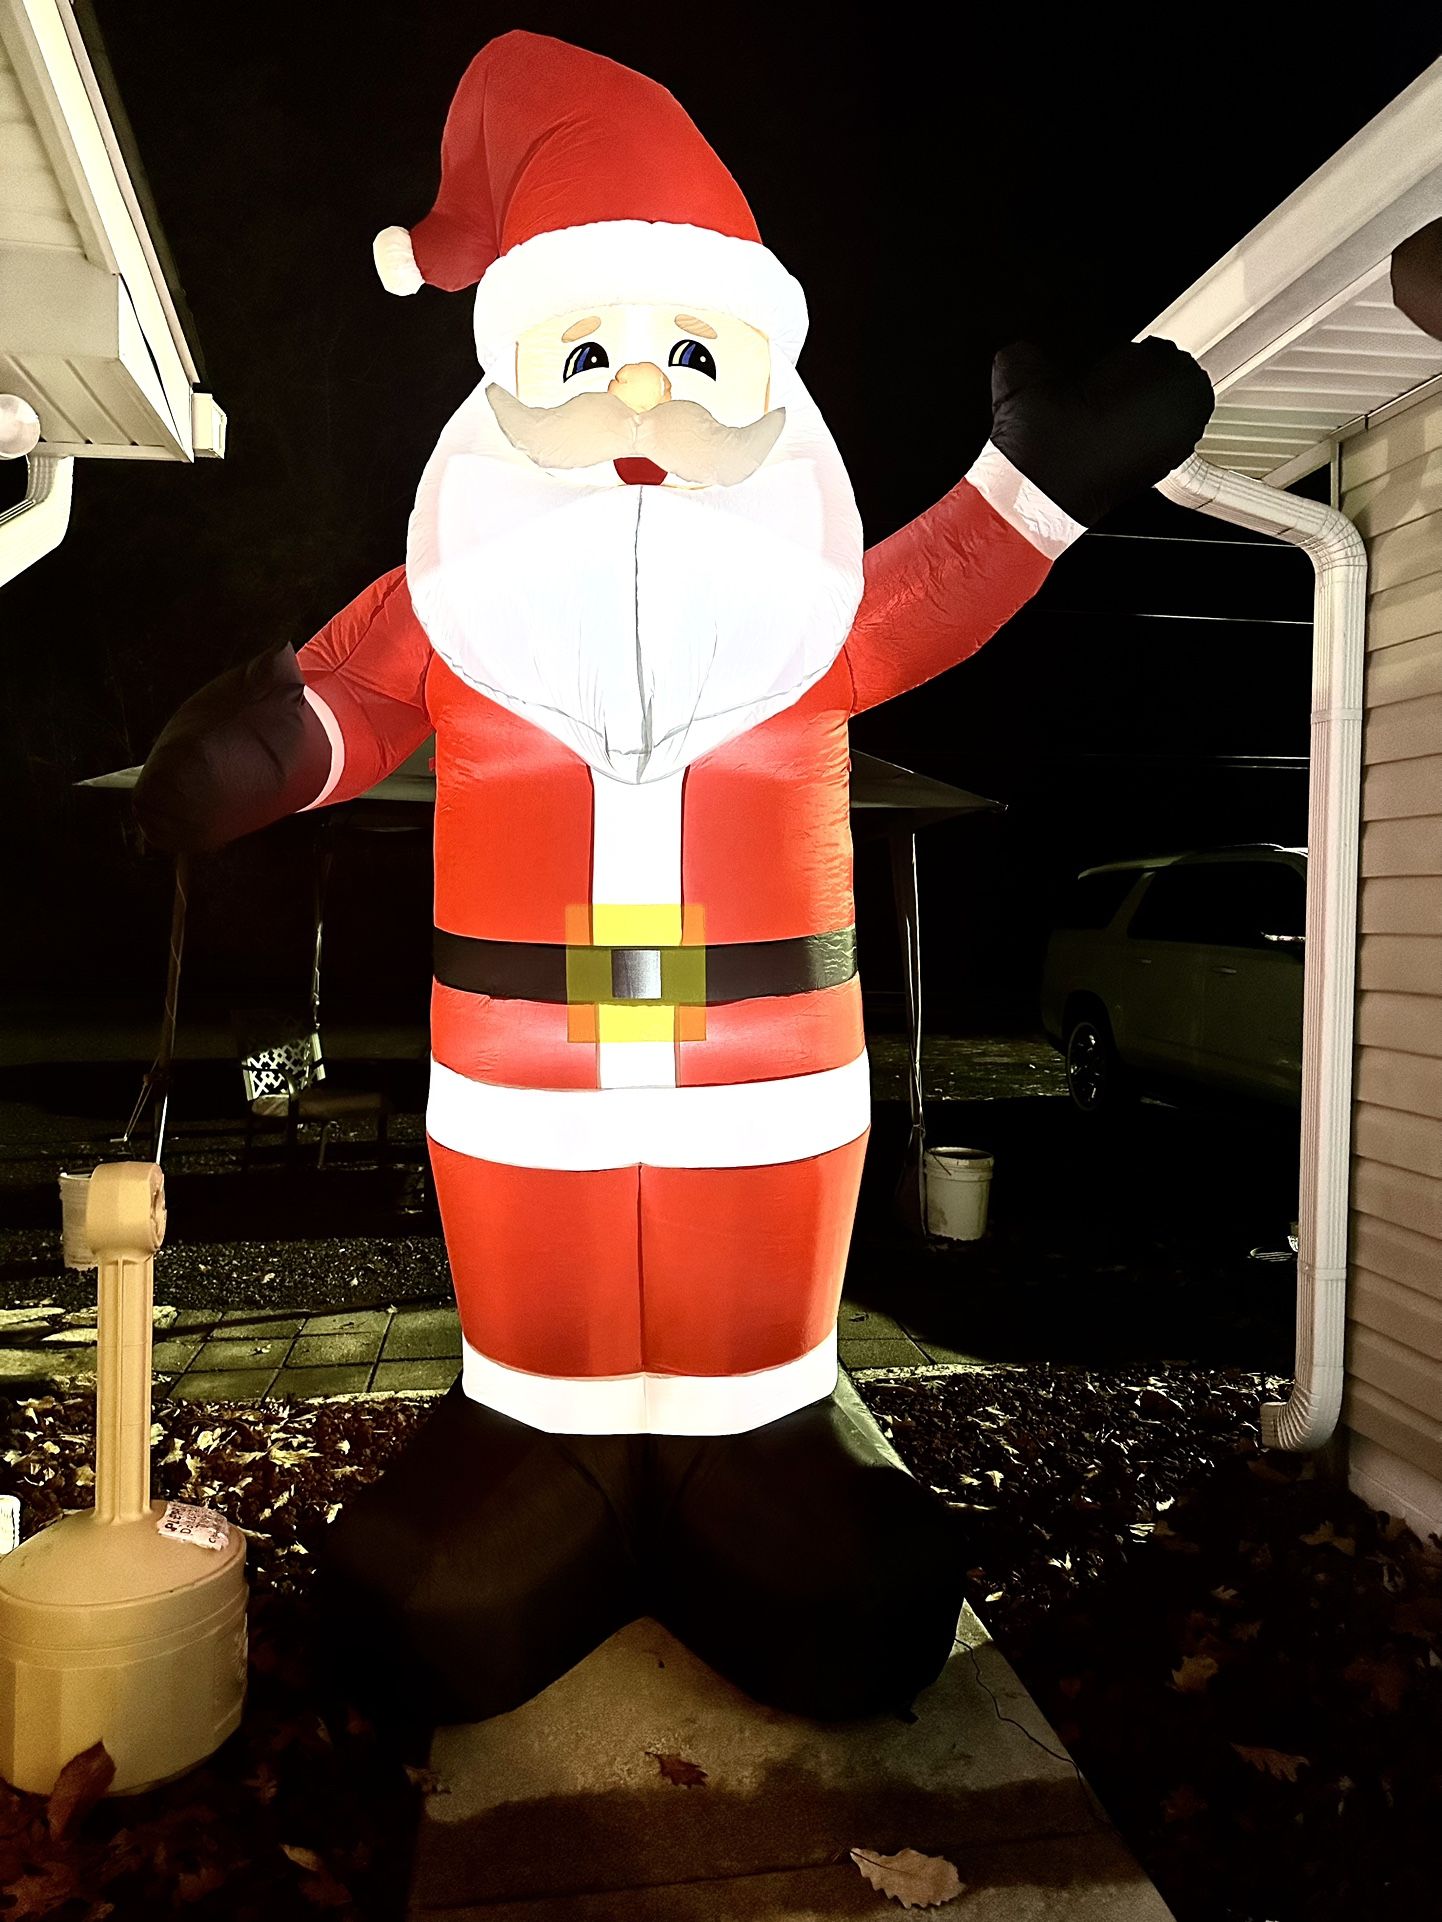 New 10 Ft Christmas Santa Inflatable Holiday Decor With LED Lights For Indoor/ Outdoor